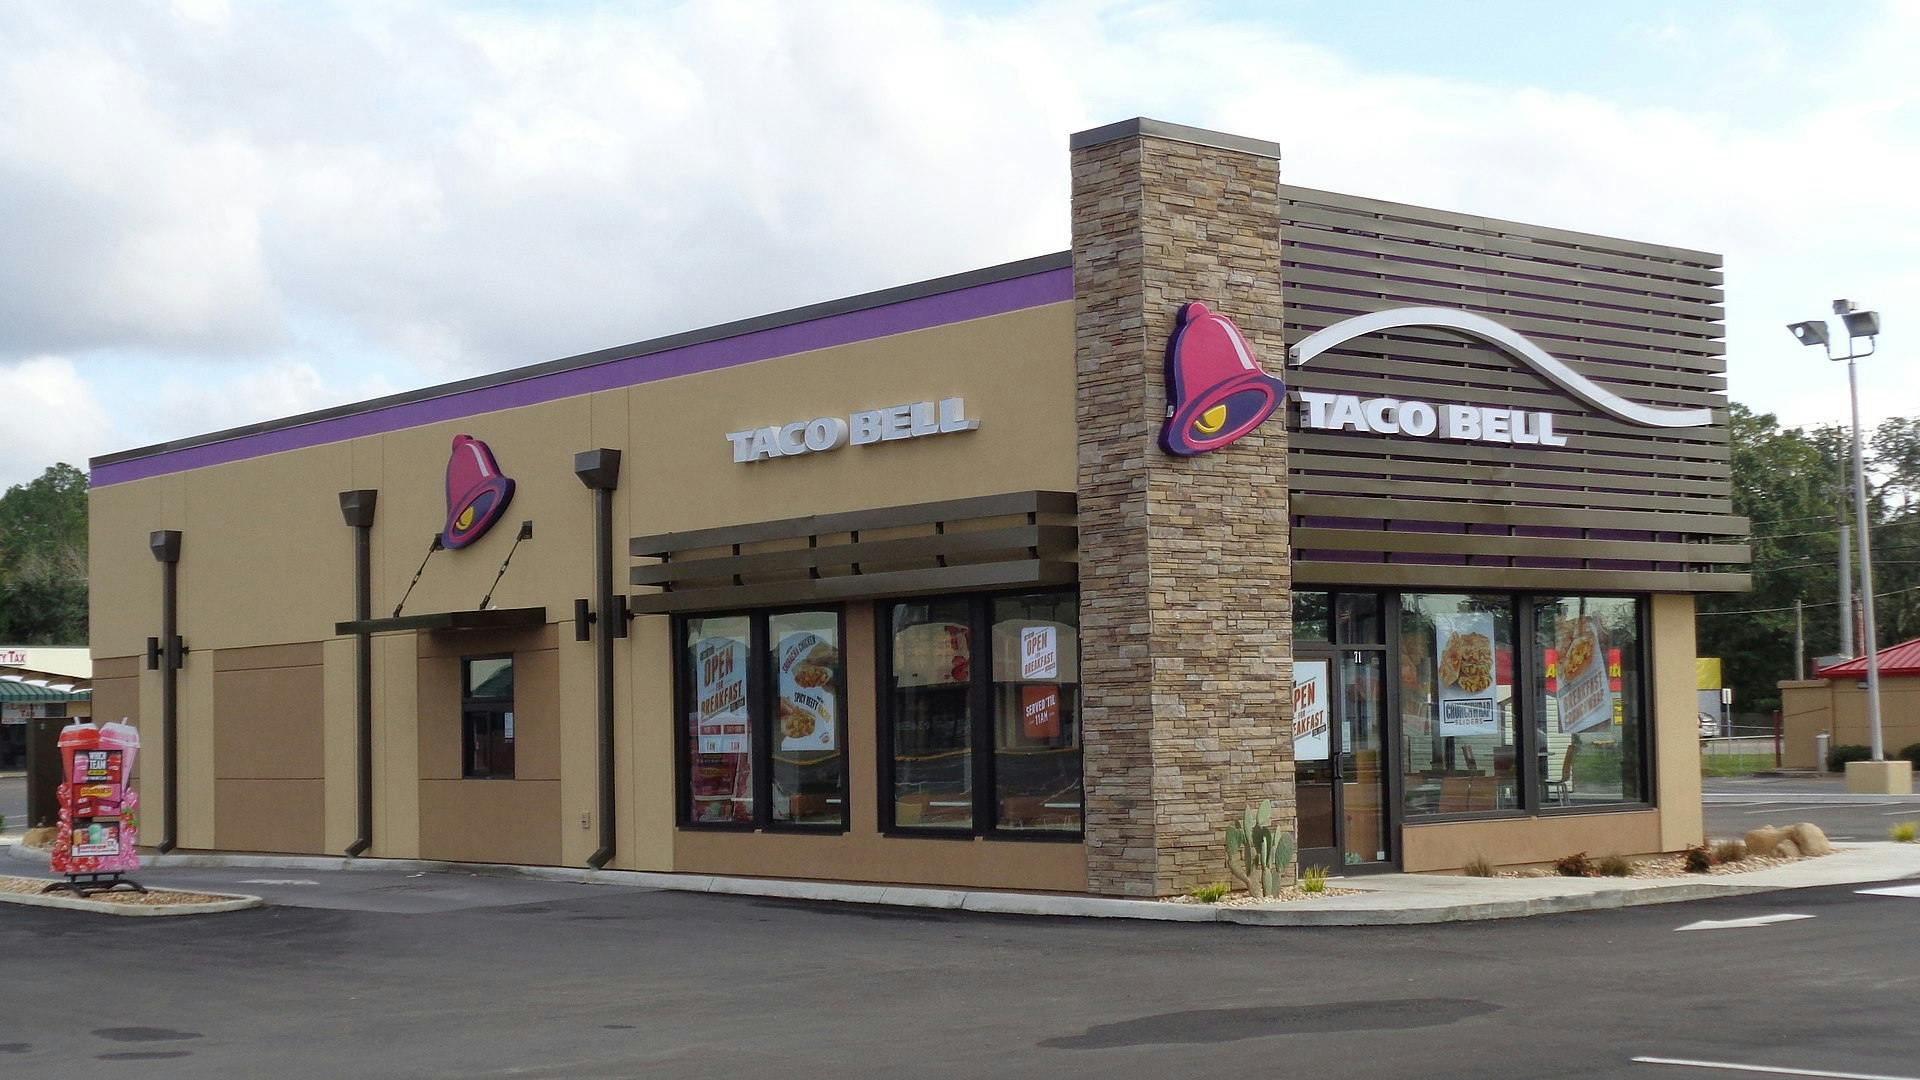 Man Sues Taco Bell Over False Advertising